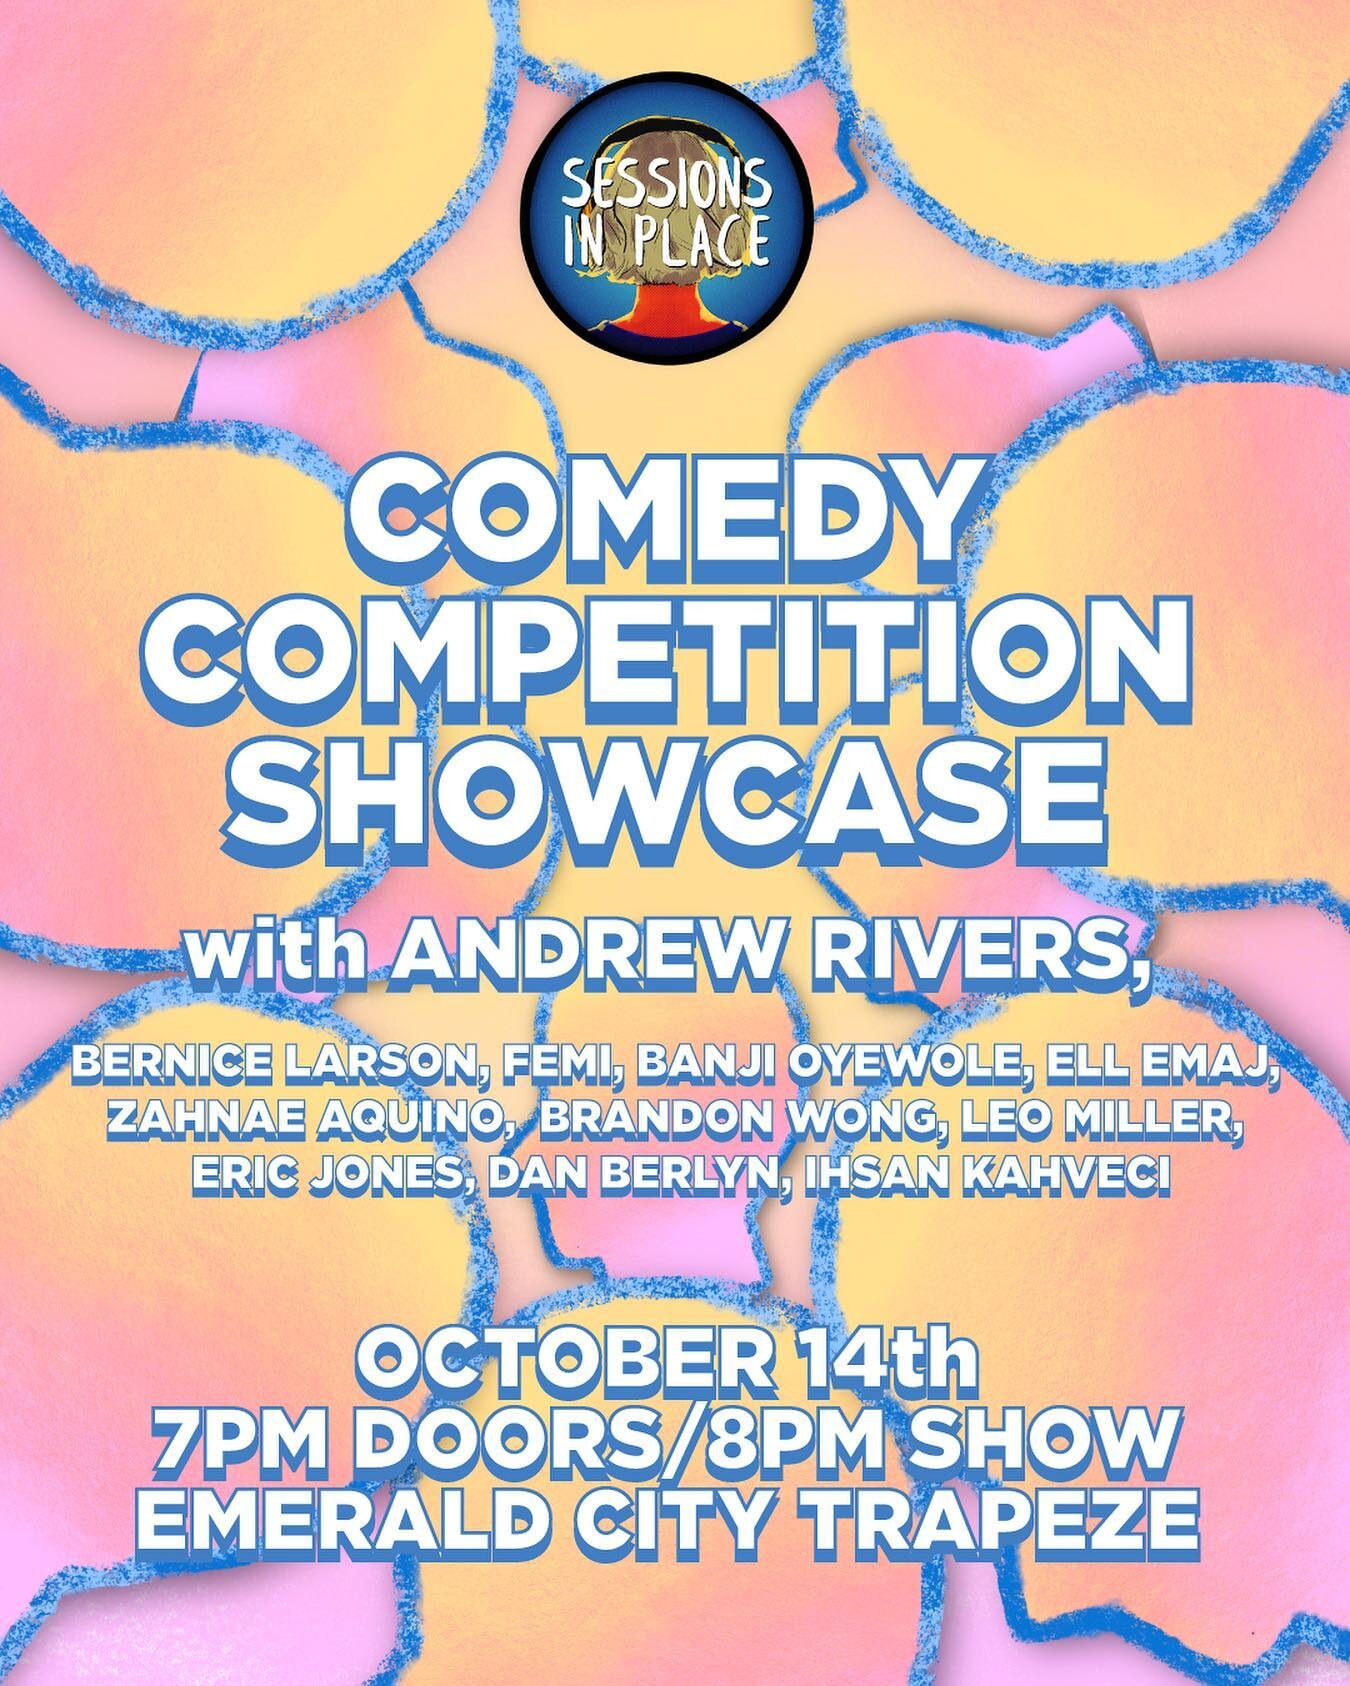 Sessions In Place presents a comedy competition showcase! 🎤🏆

Saturday, 10/14 at 7pm at @emeraldcitytrapeze 

Our champions competed over 5 months to earn their spots on this showcase. 

Each comic will have a 10 minute set filmed with 7 cameras an